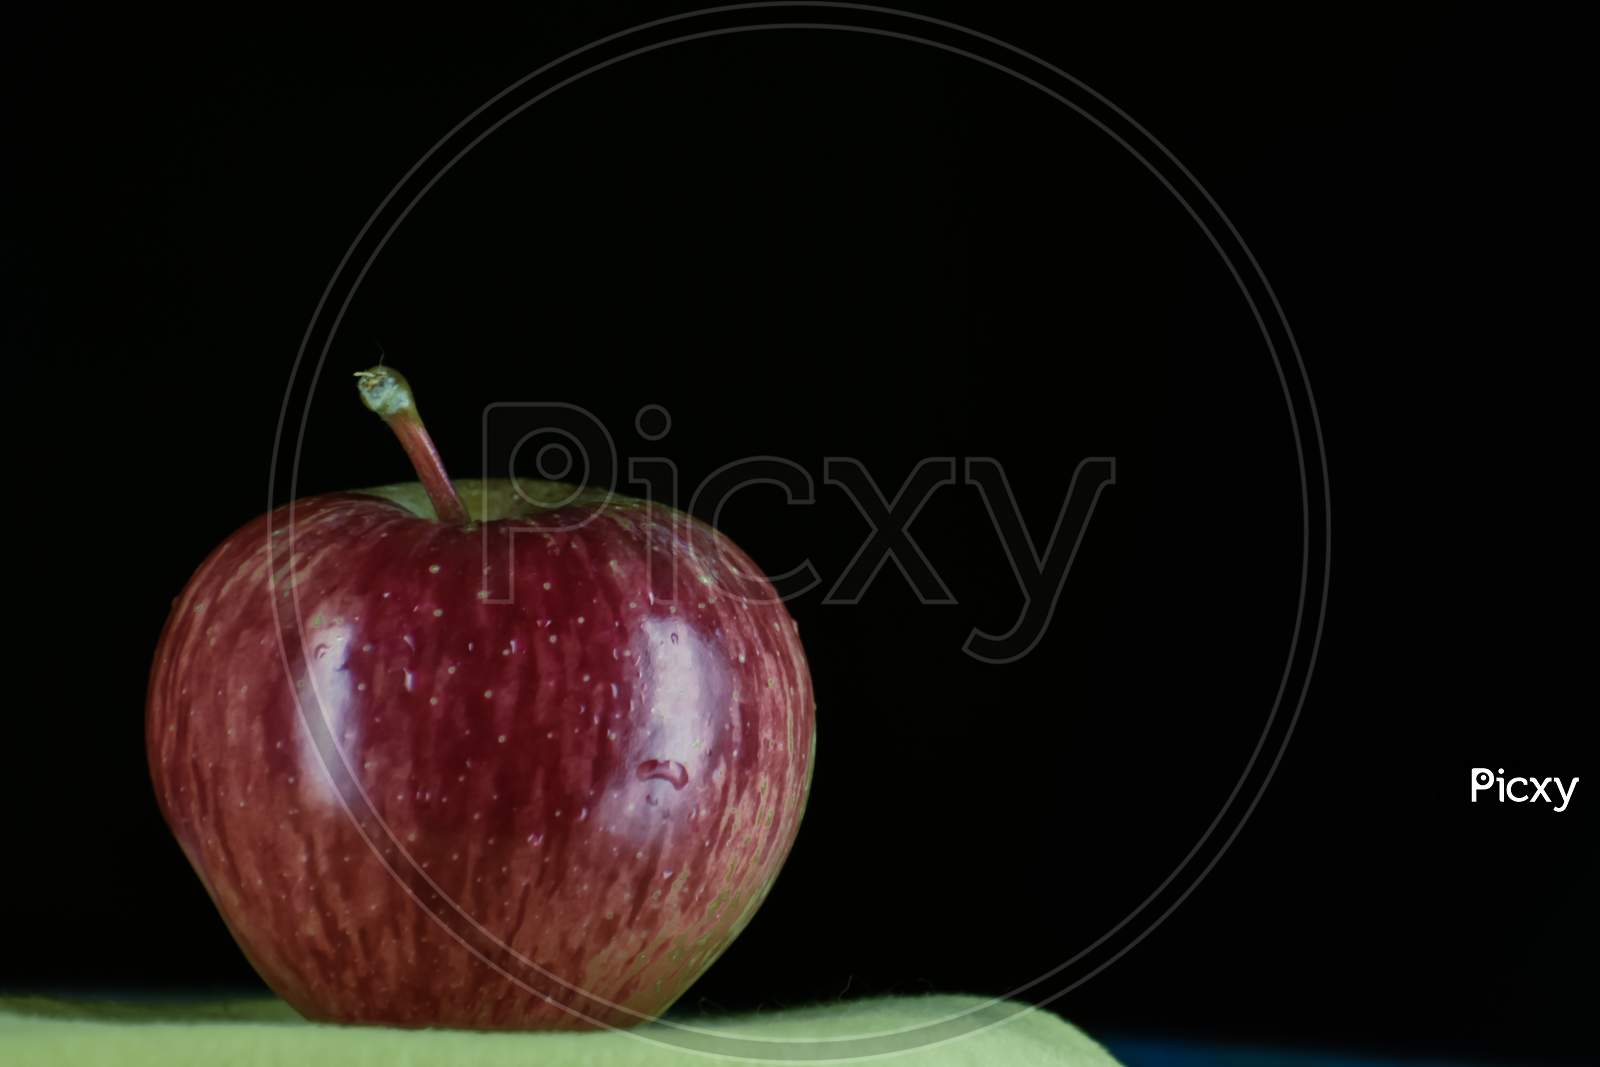 Beautiful Background Image Of An Apple.